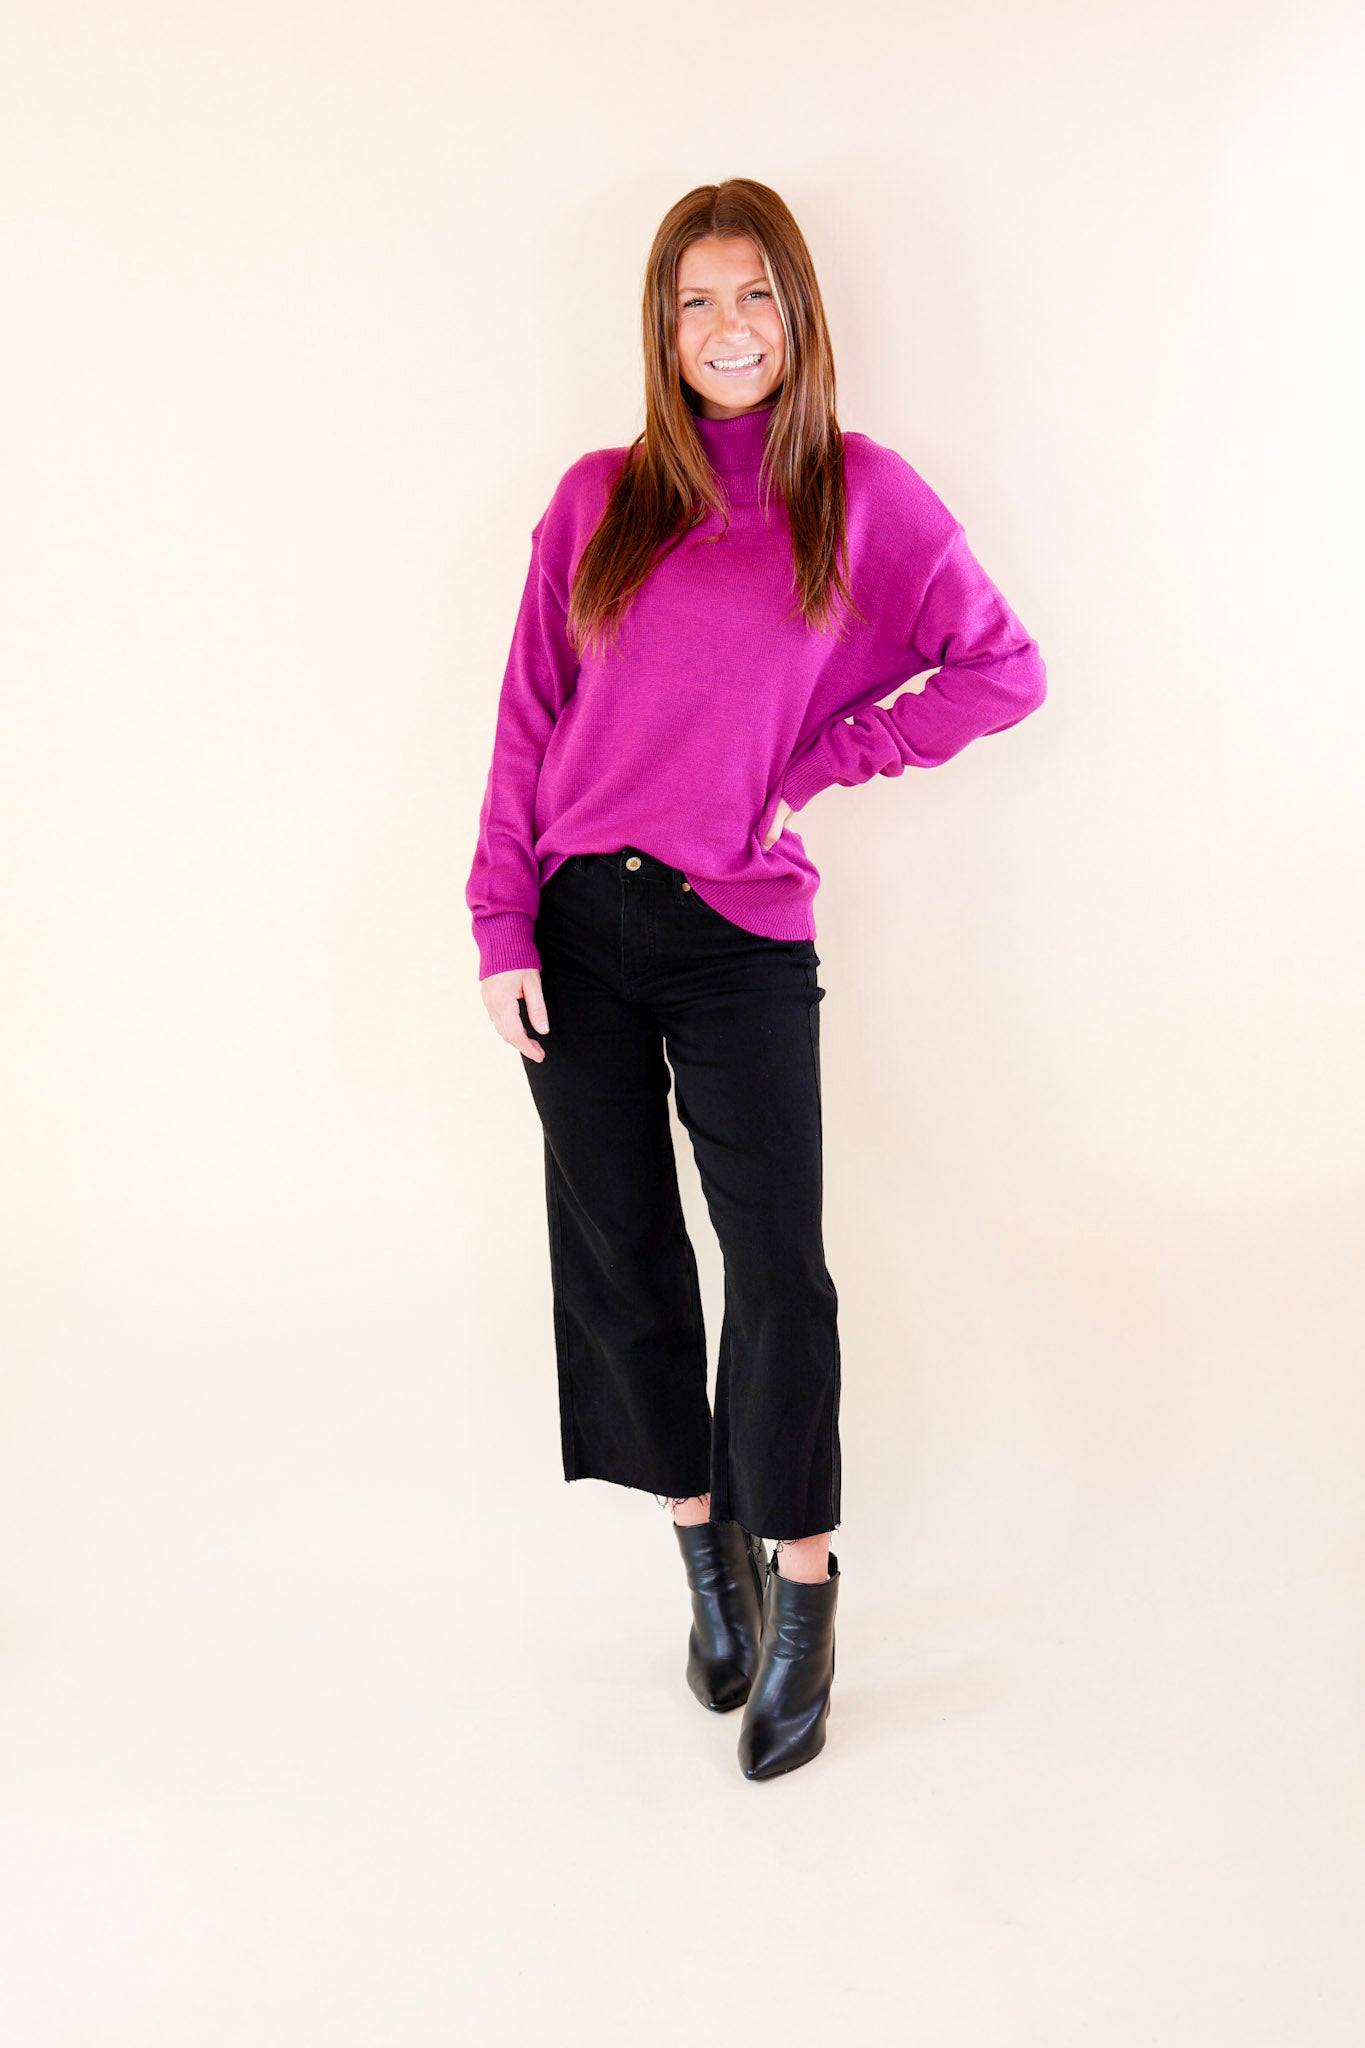 Chilly Days Ahead Turtle Neck Sweater with Long Sleeves in Magenta - Giddy Up Glamour Boutique